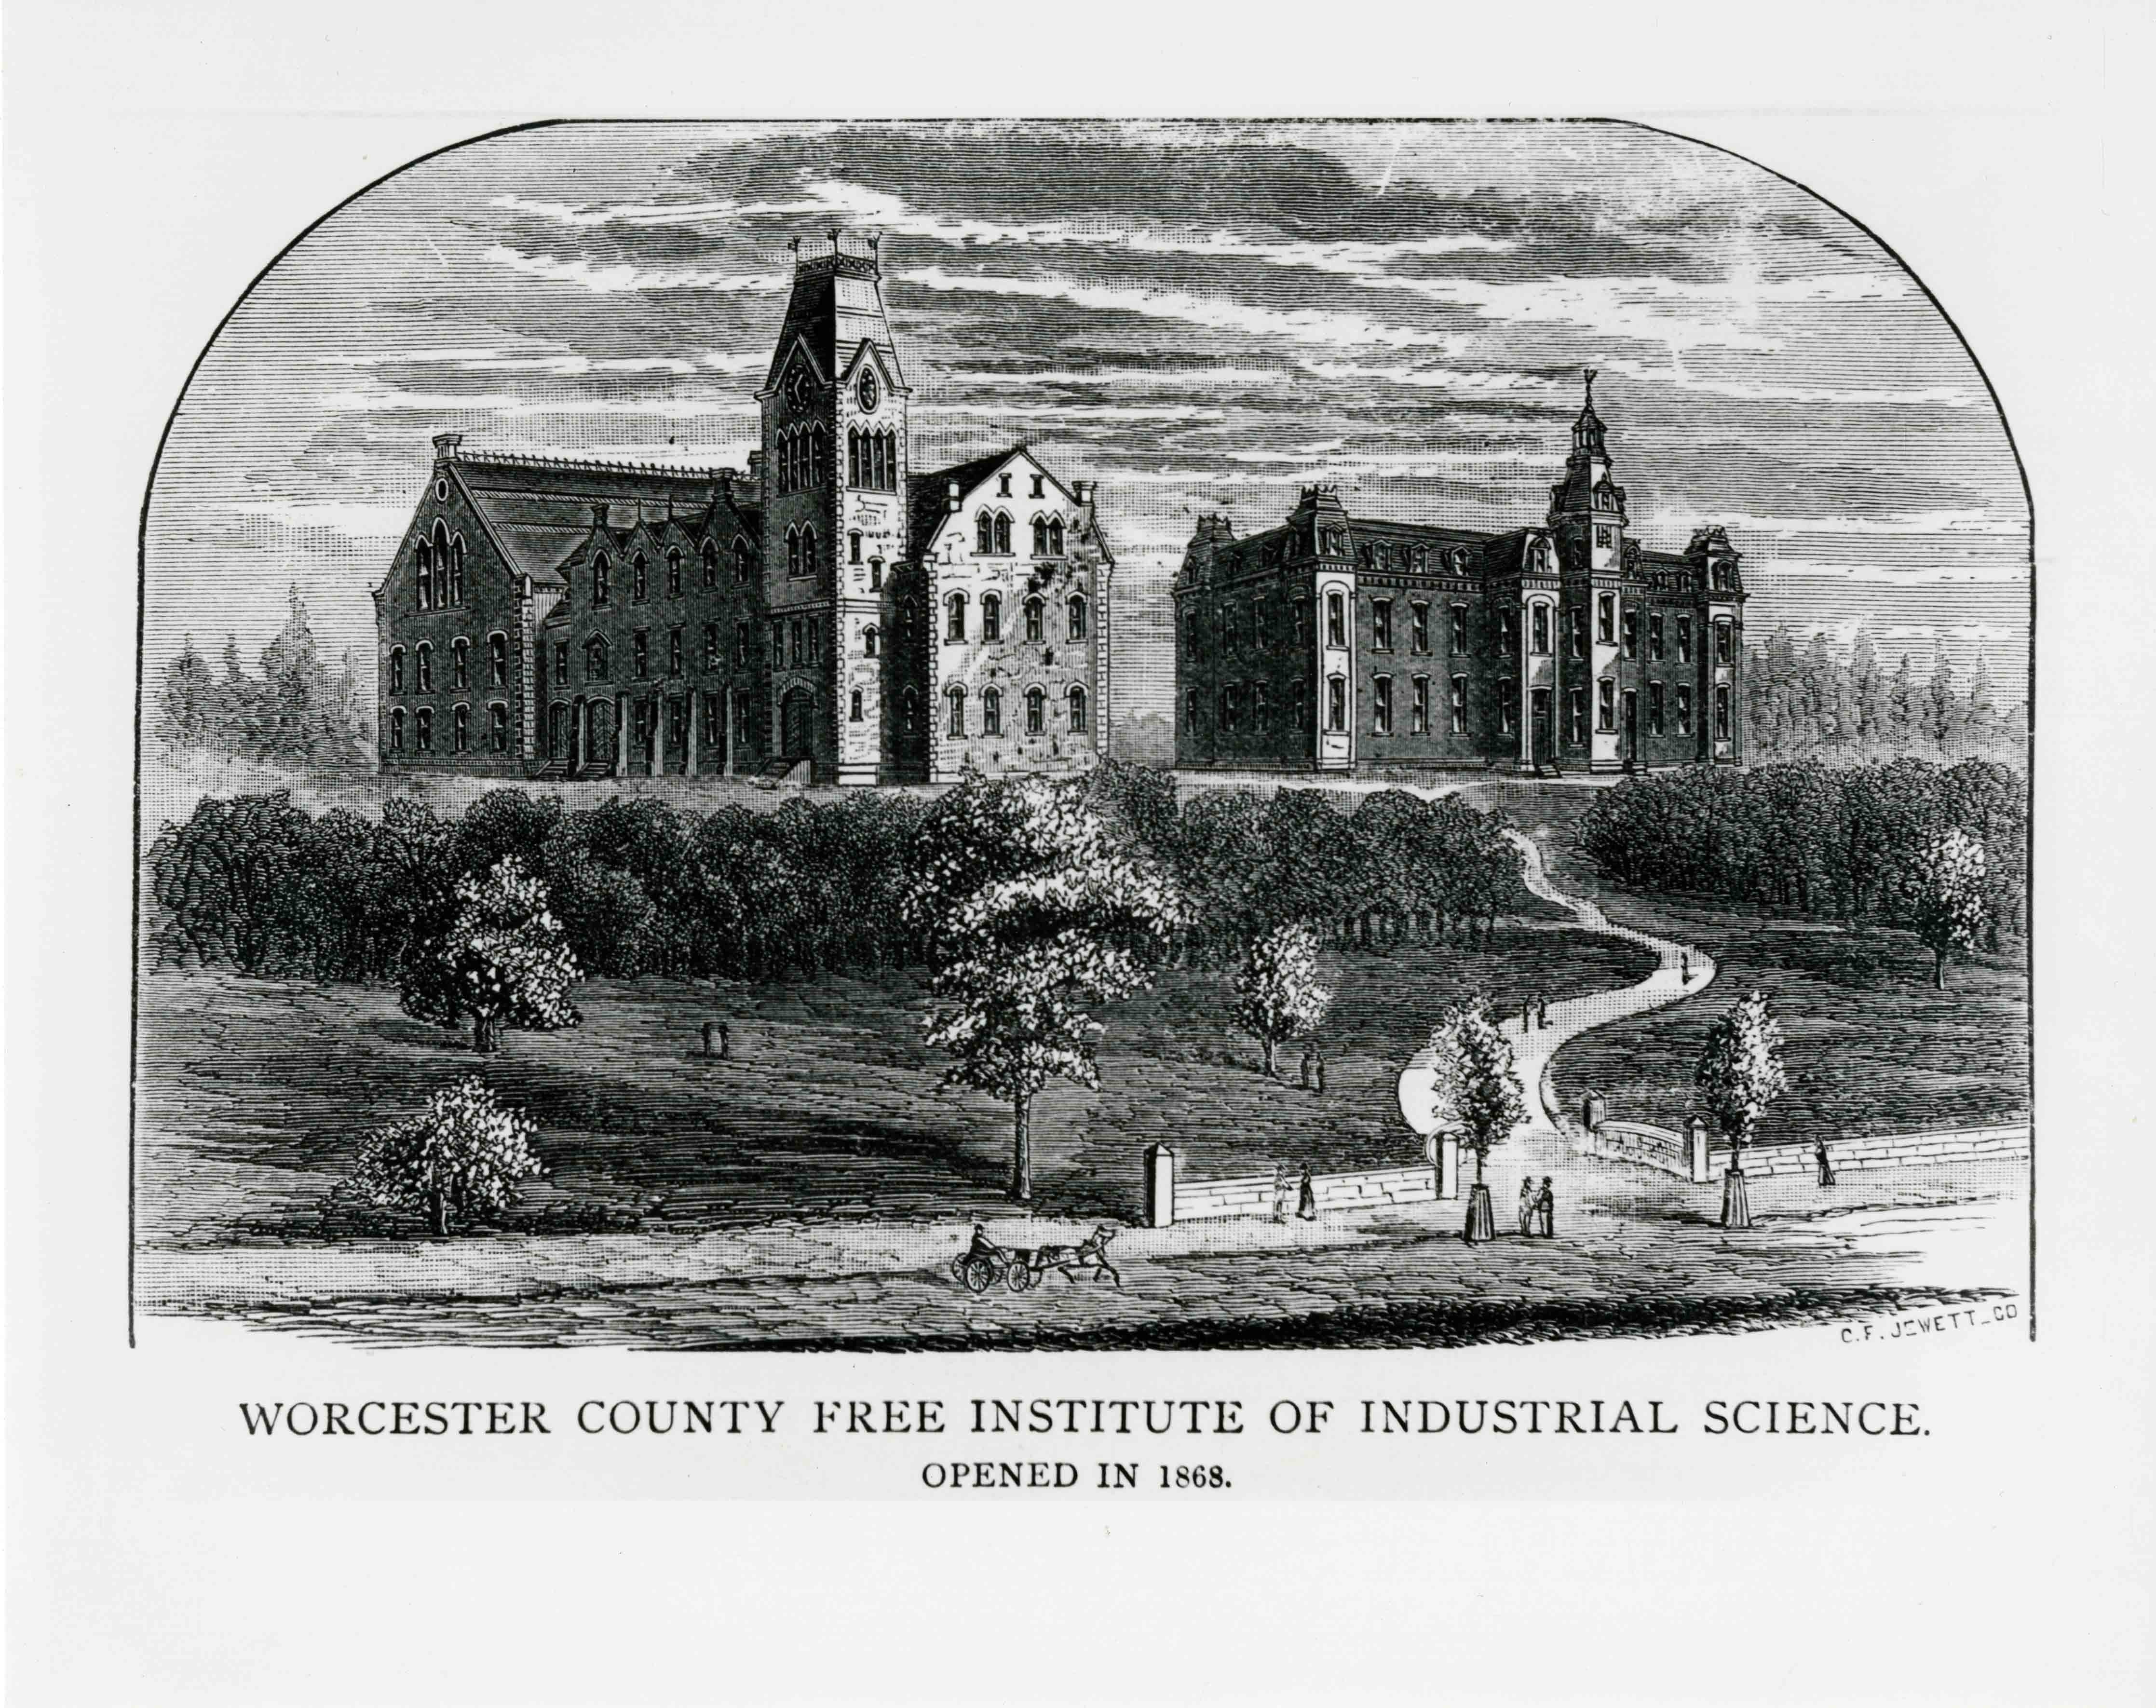 Worcester County Free Institute of Industrial Science opened in 1868